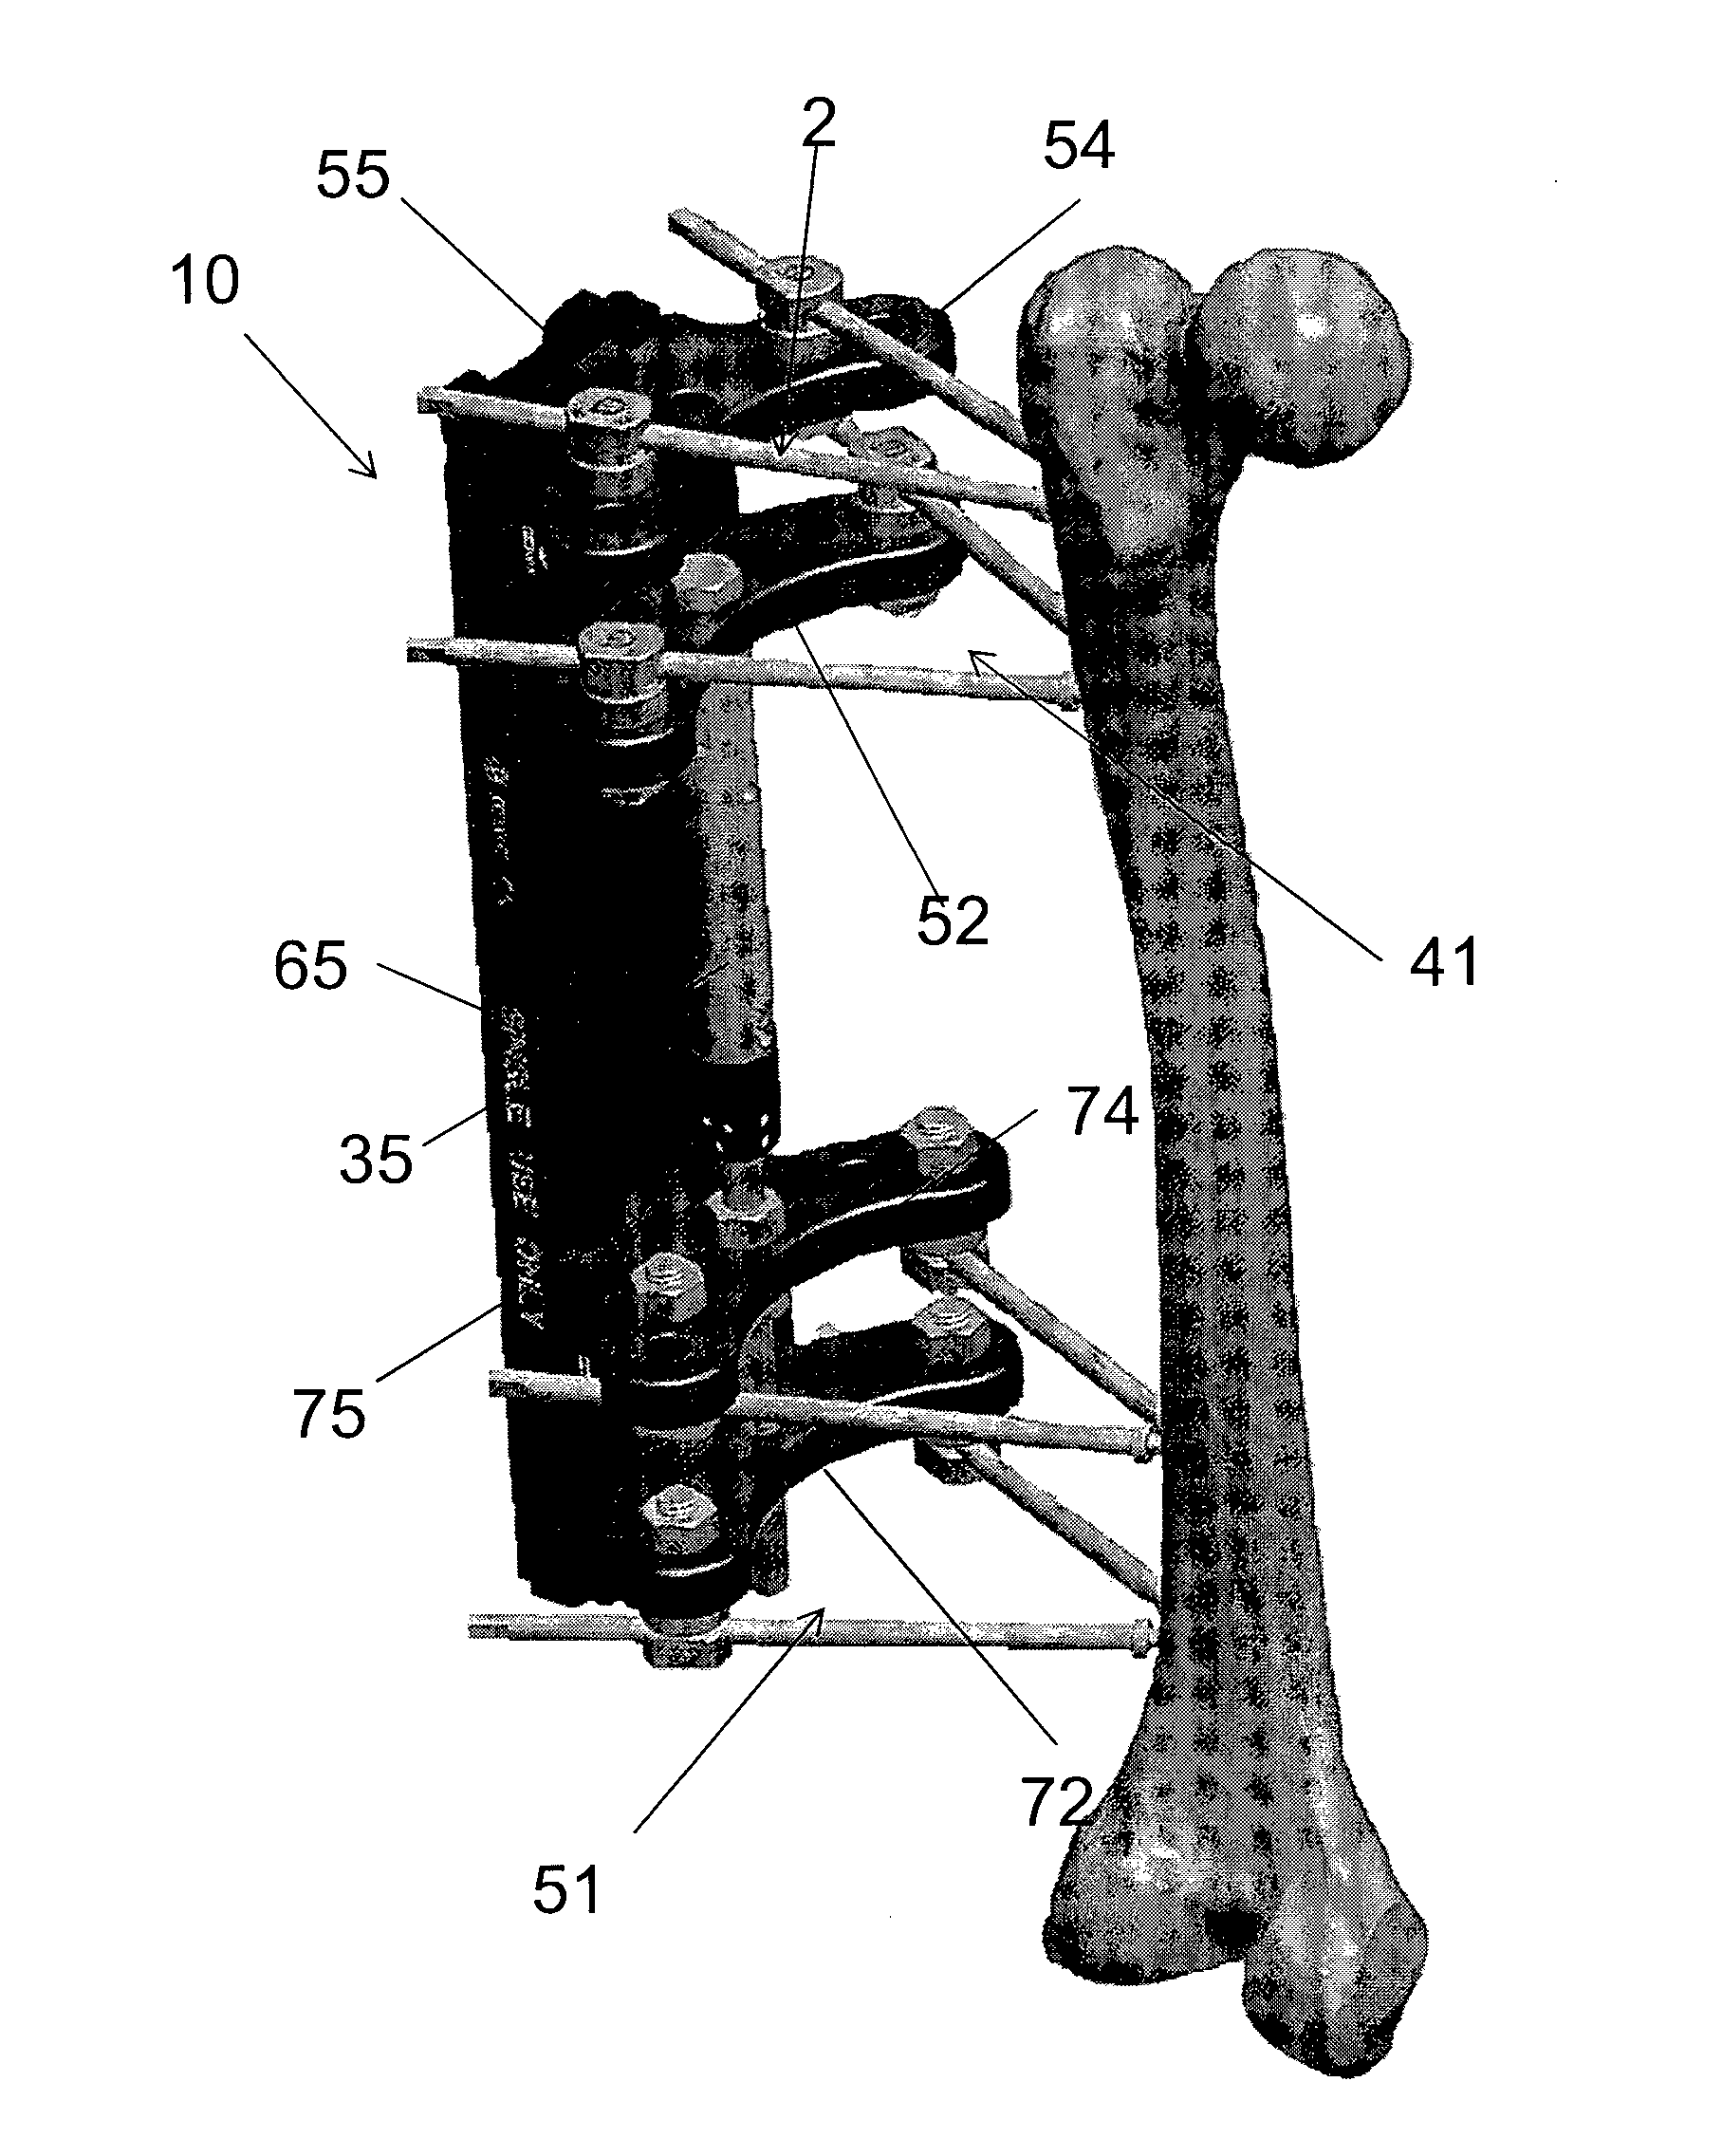 Elongated pin for an external modular fixation system for temporary and/or permanent fixation applications and external modular fixation system